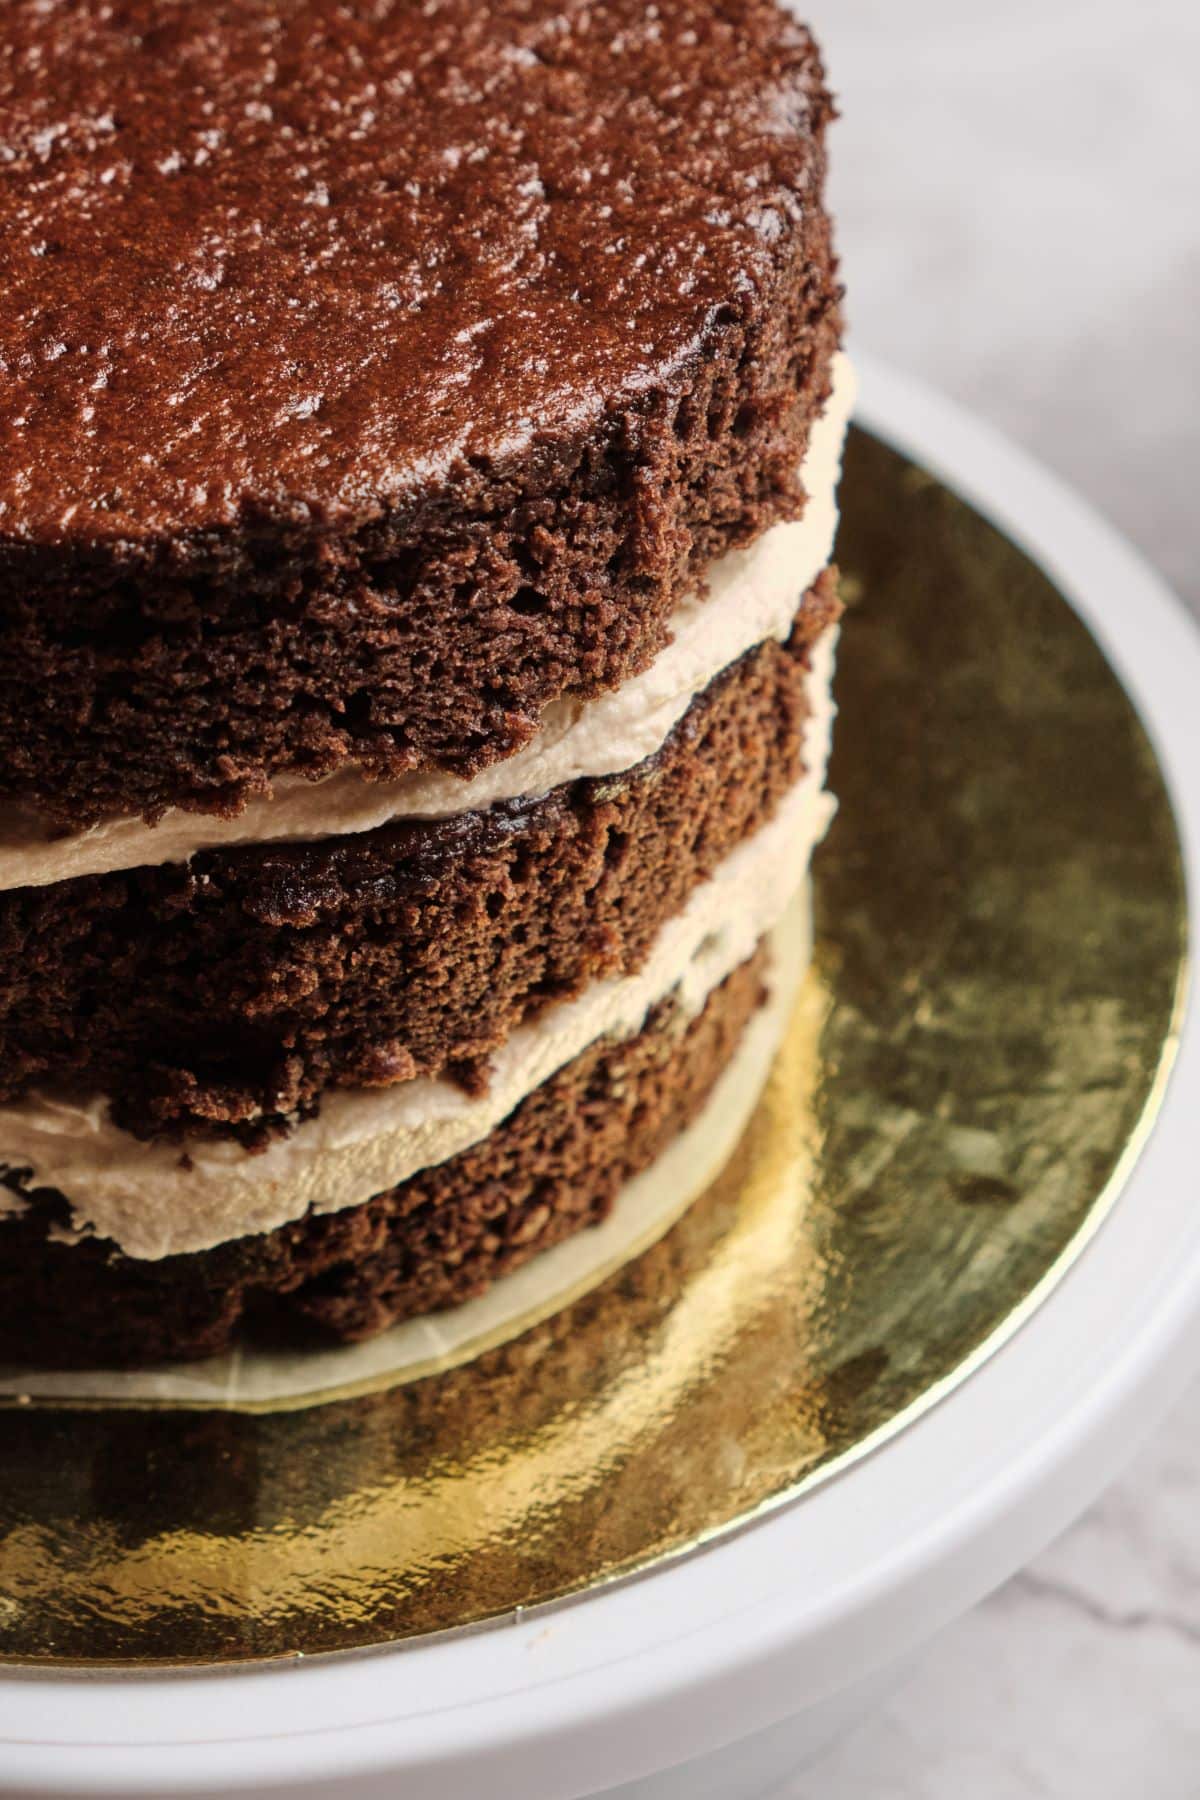 A closeup of the three moist layers of chocolate cake with peanut butter frosting.